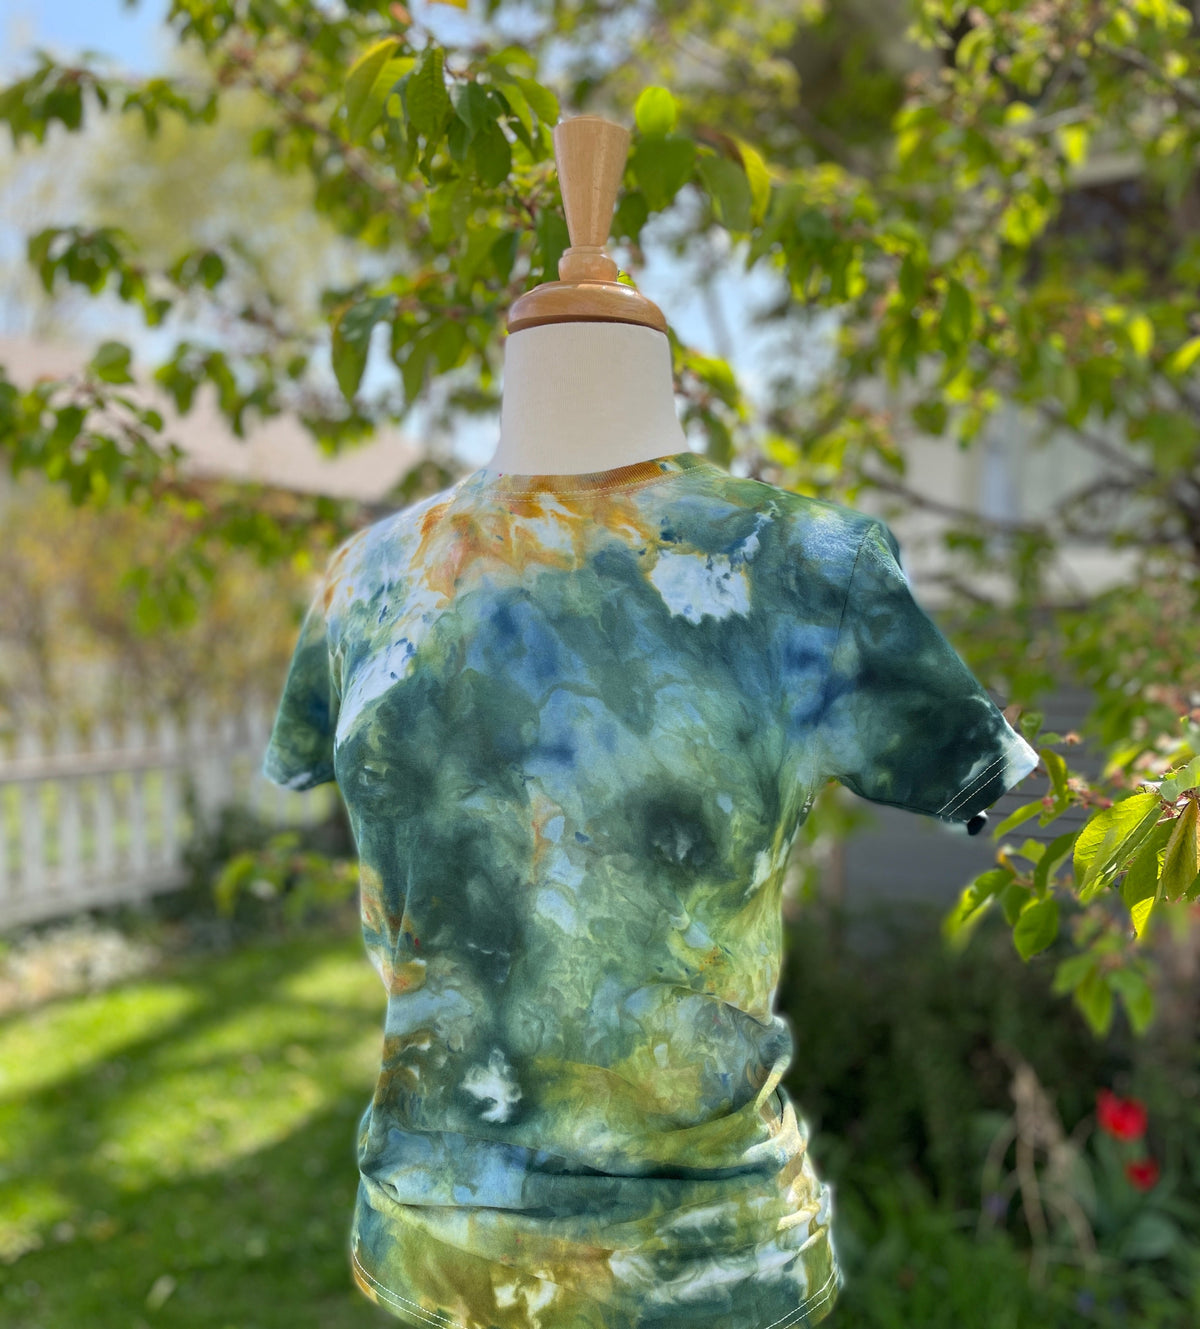 How To Ice Dye - Tie Dye And Teal